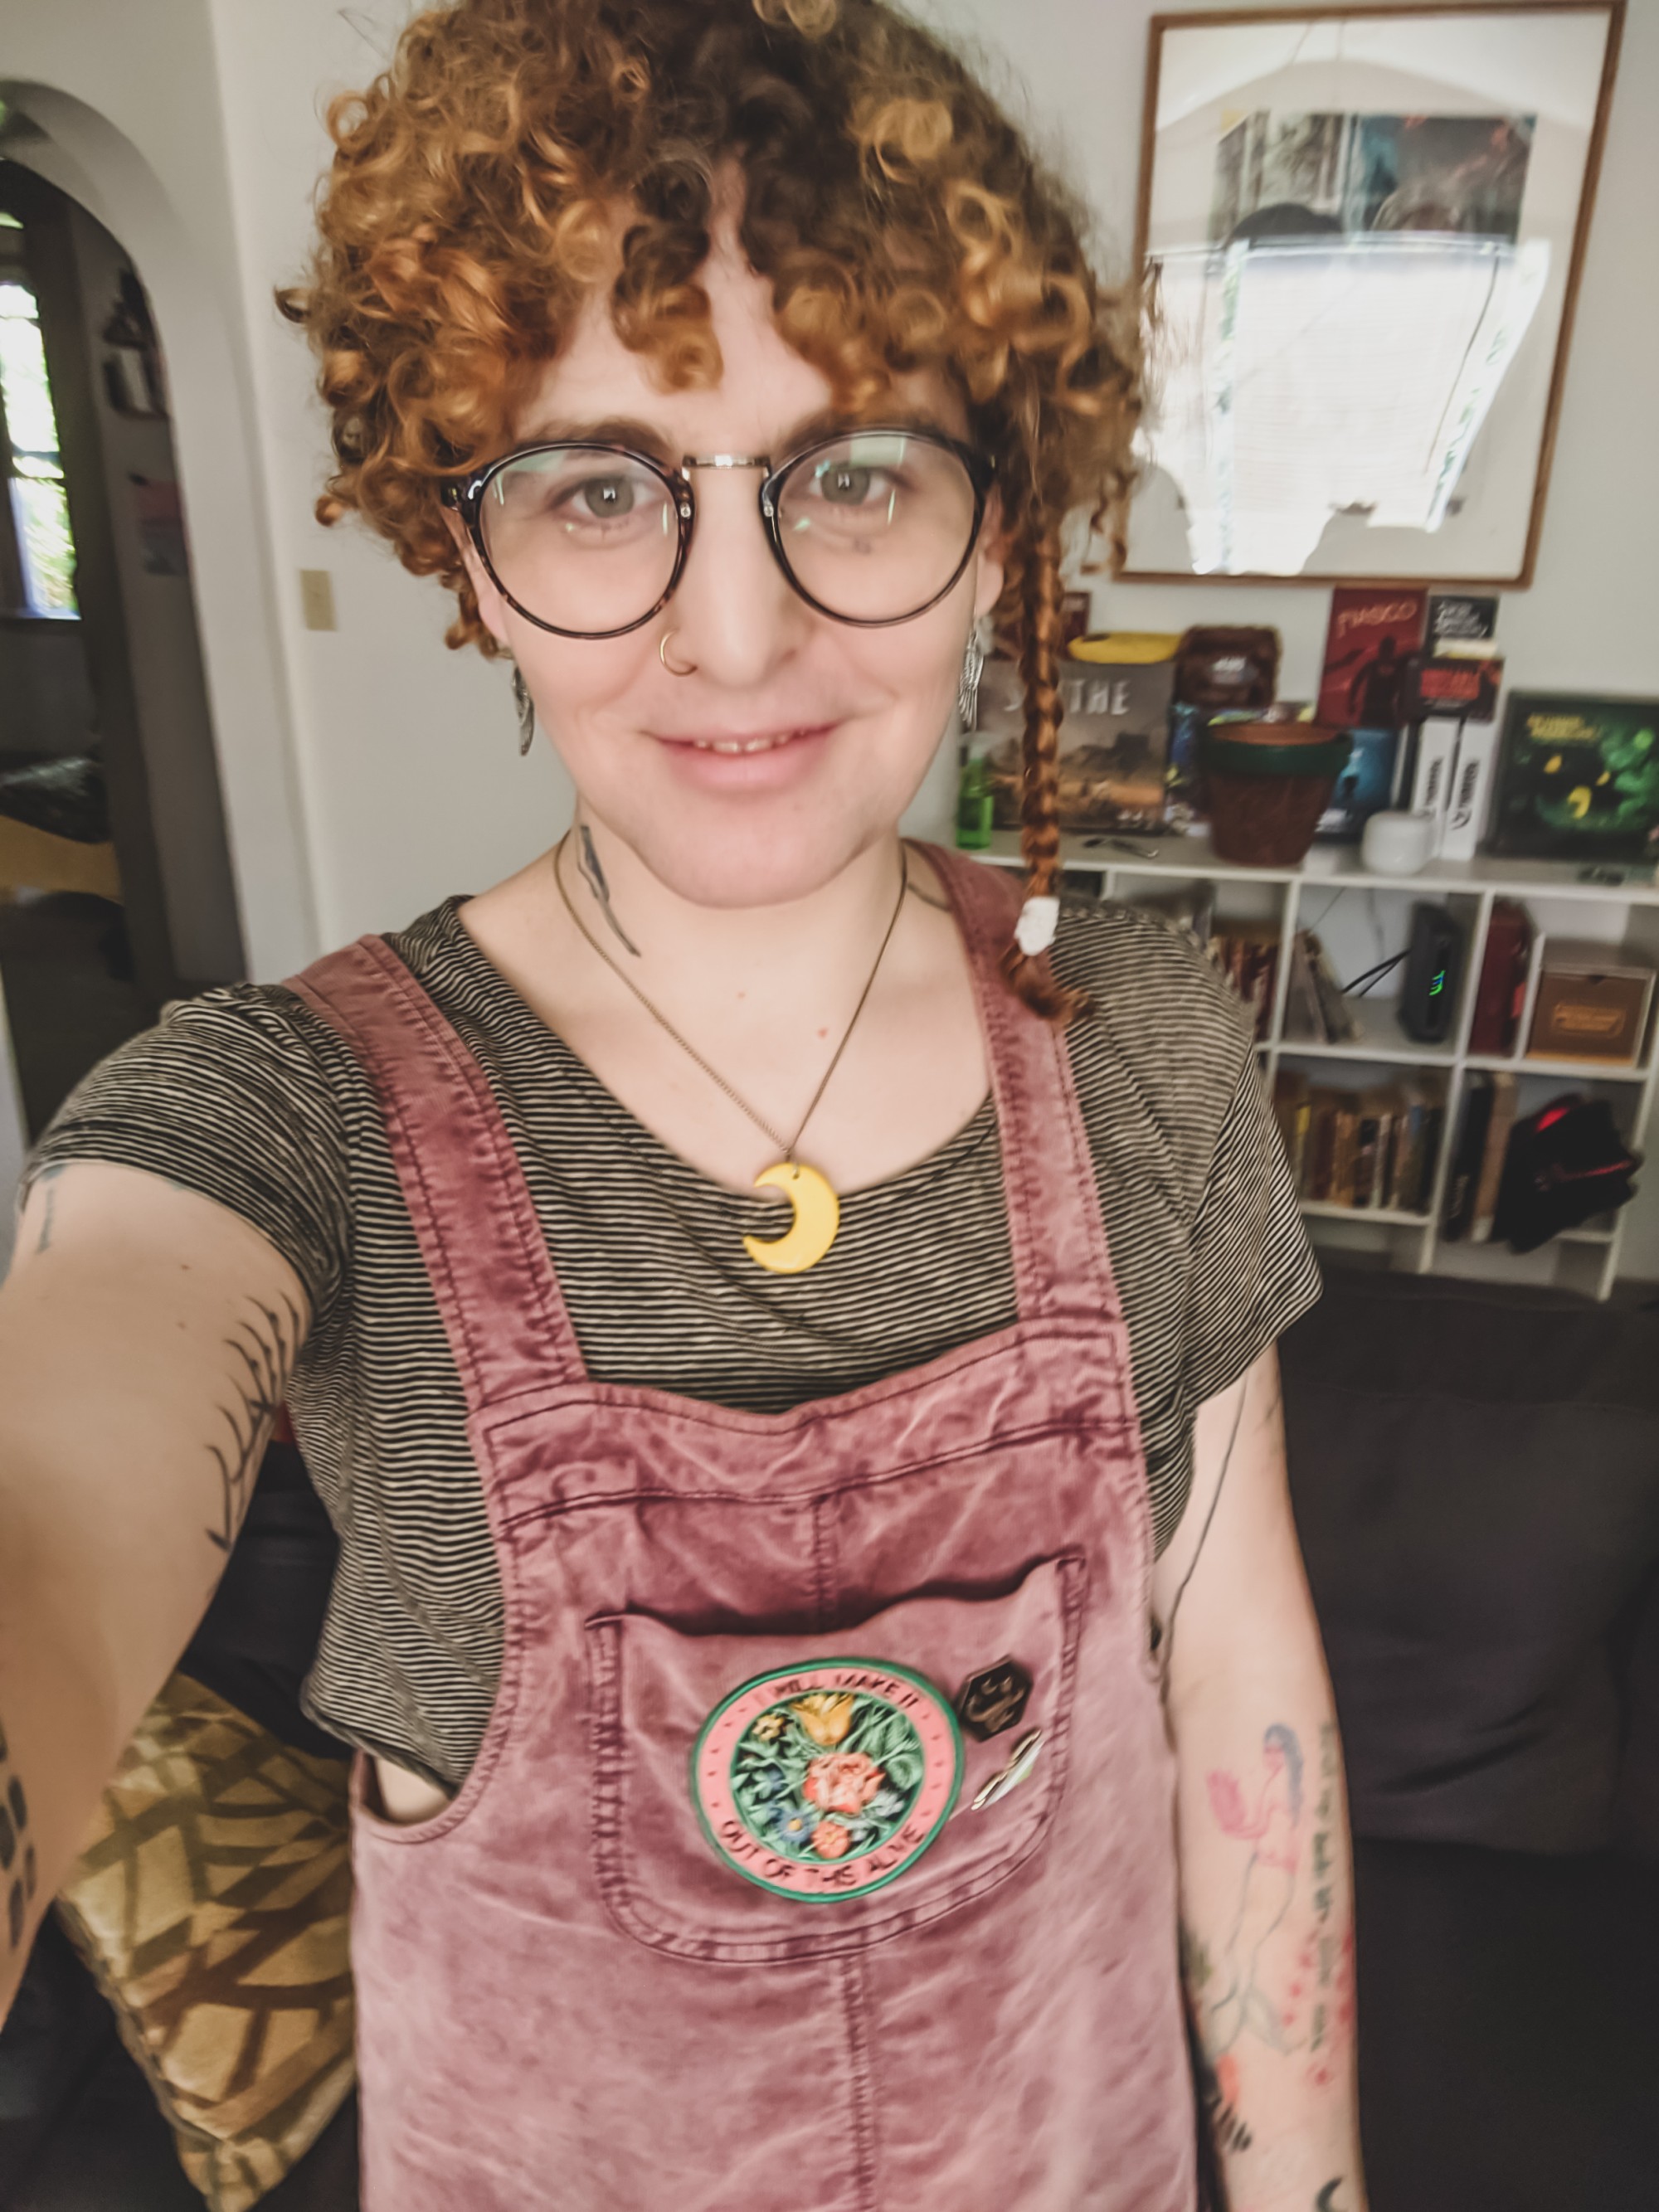 Never Angeline Nørth is shown in a selfie-style photo, holding the camera and centered, cropped from mid-waist up. She is wearing pink overalls with a black and white horizontal striped shirt underneath, a large yellow crescent moon necklace, and large round glasses.